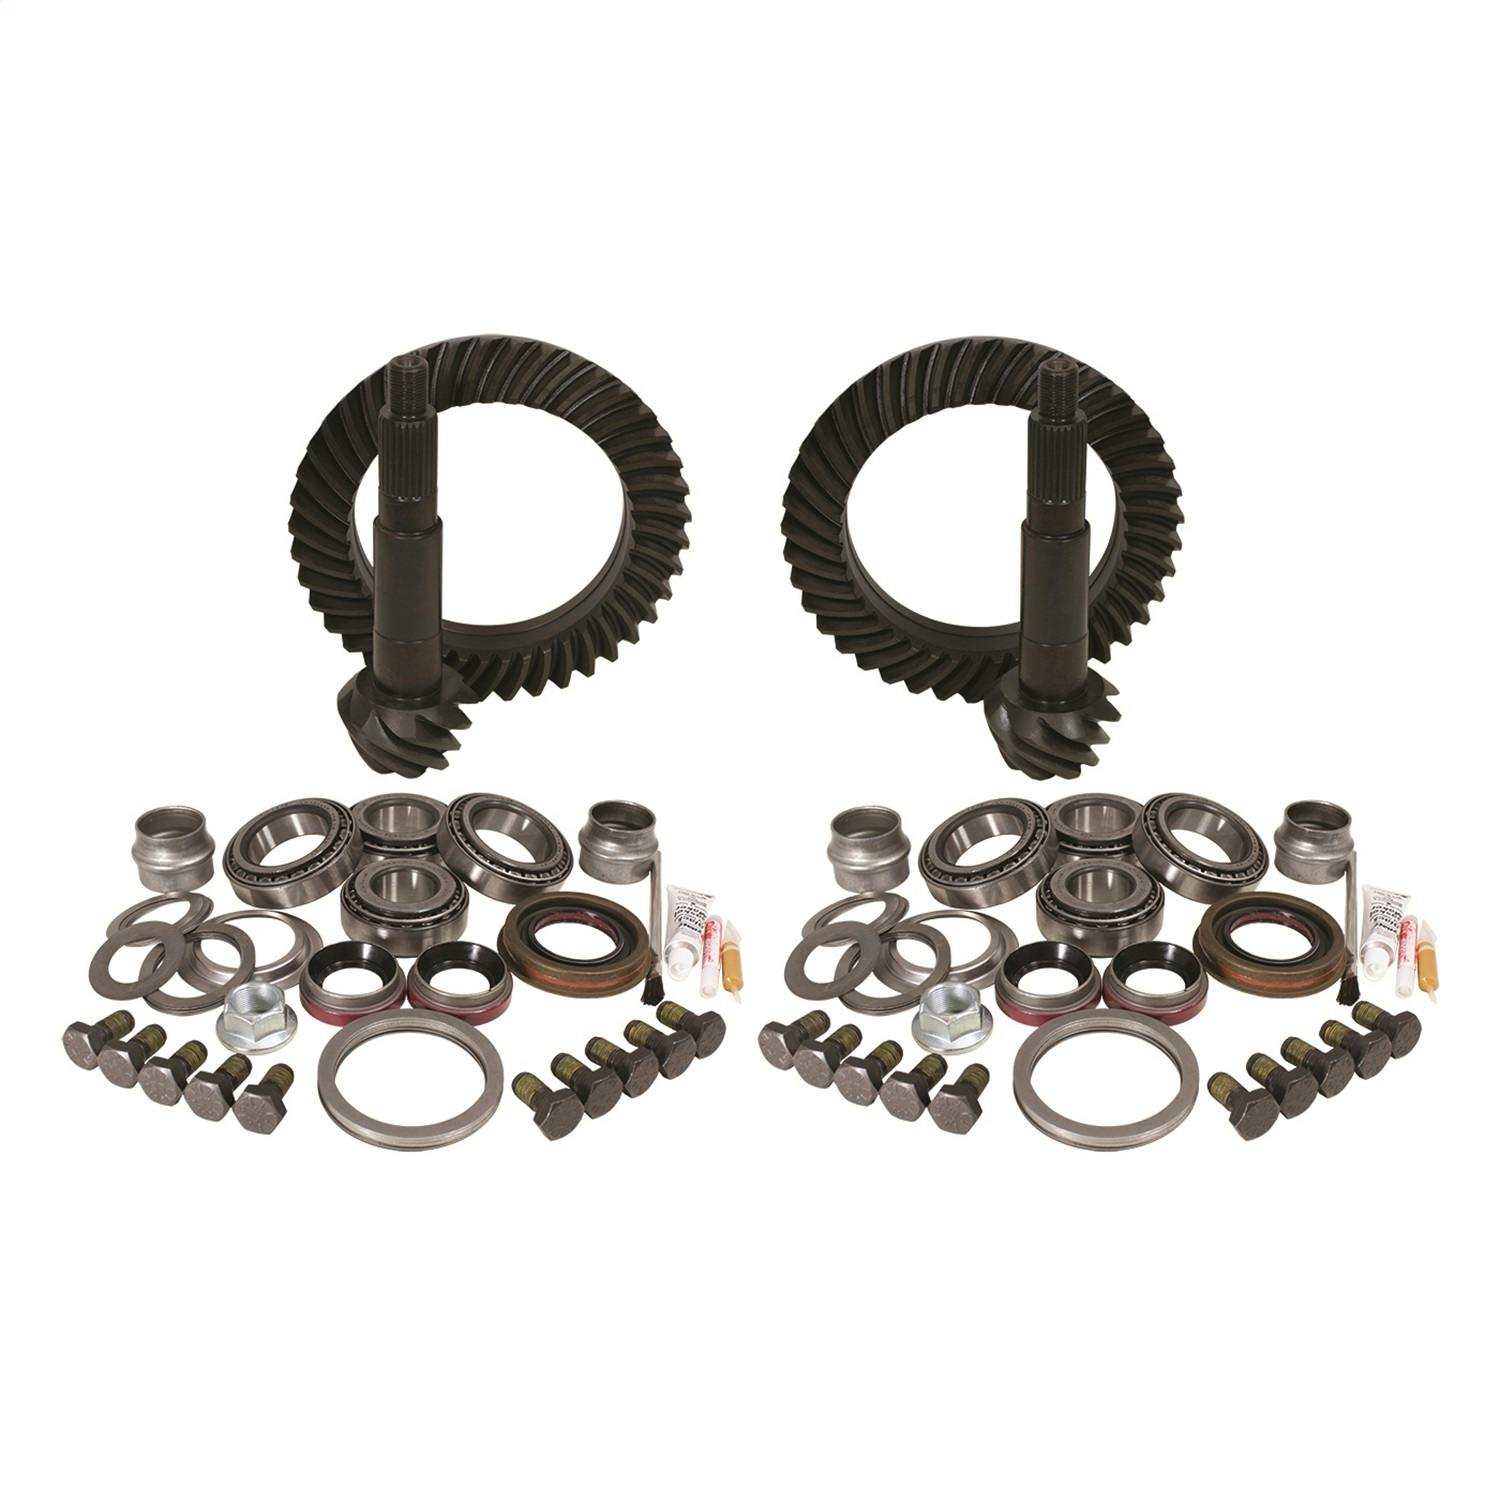 USA Standard Gear ZGK011 Ring And Pinion Set And Complete Install Kit